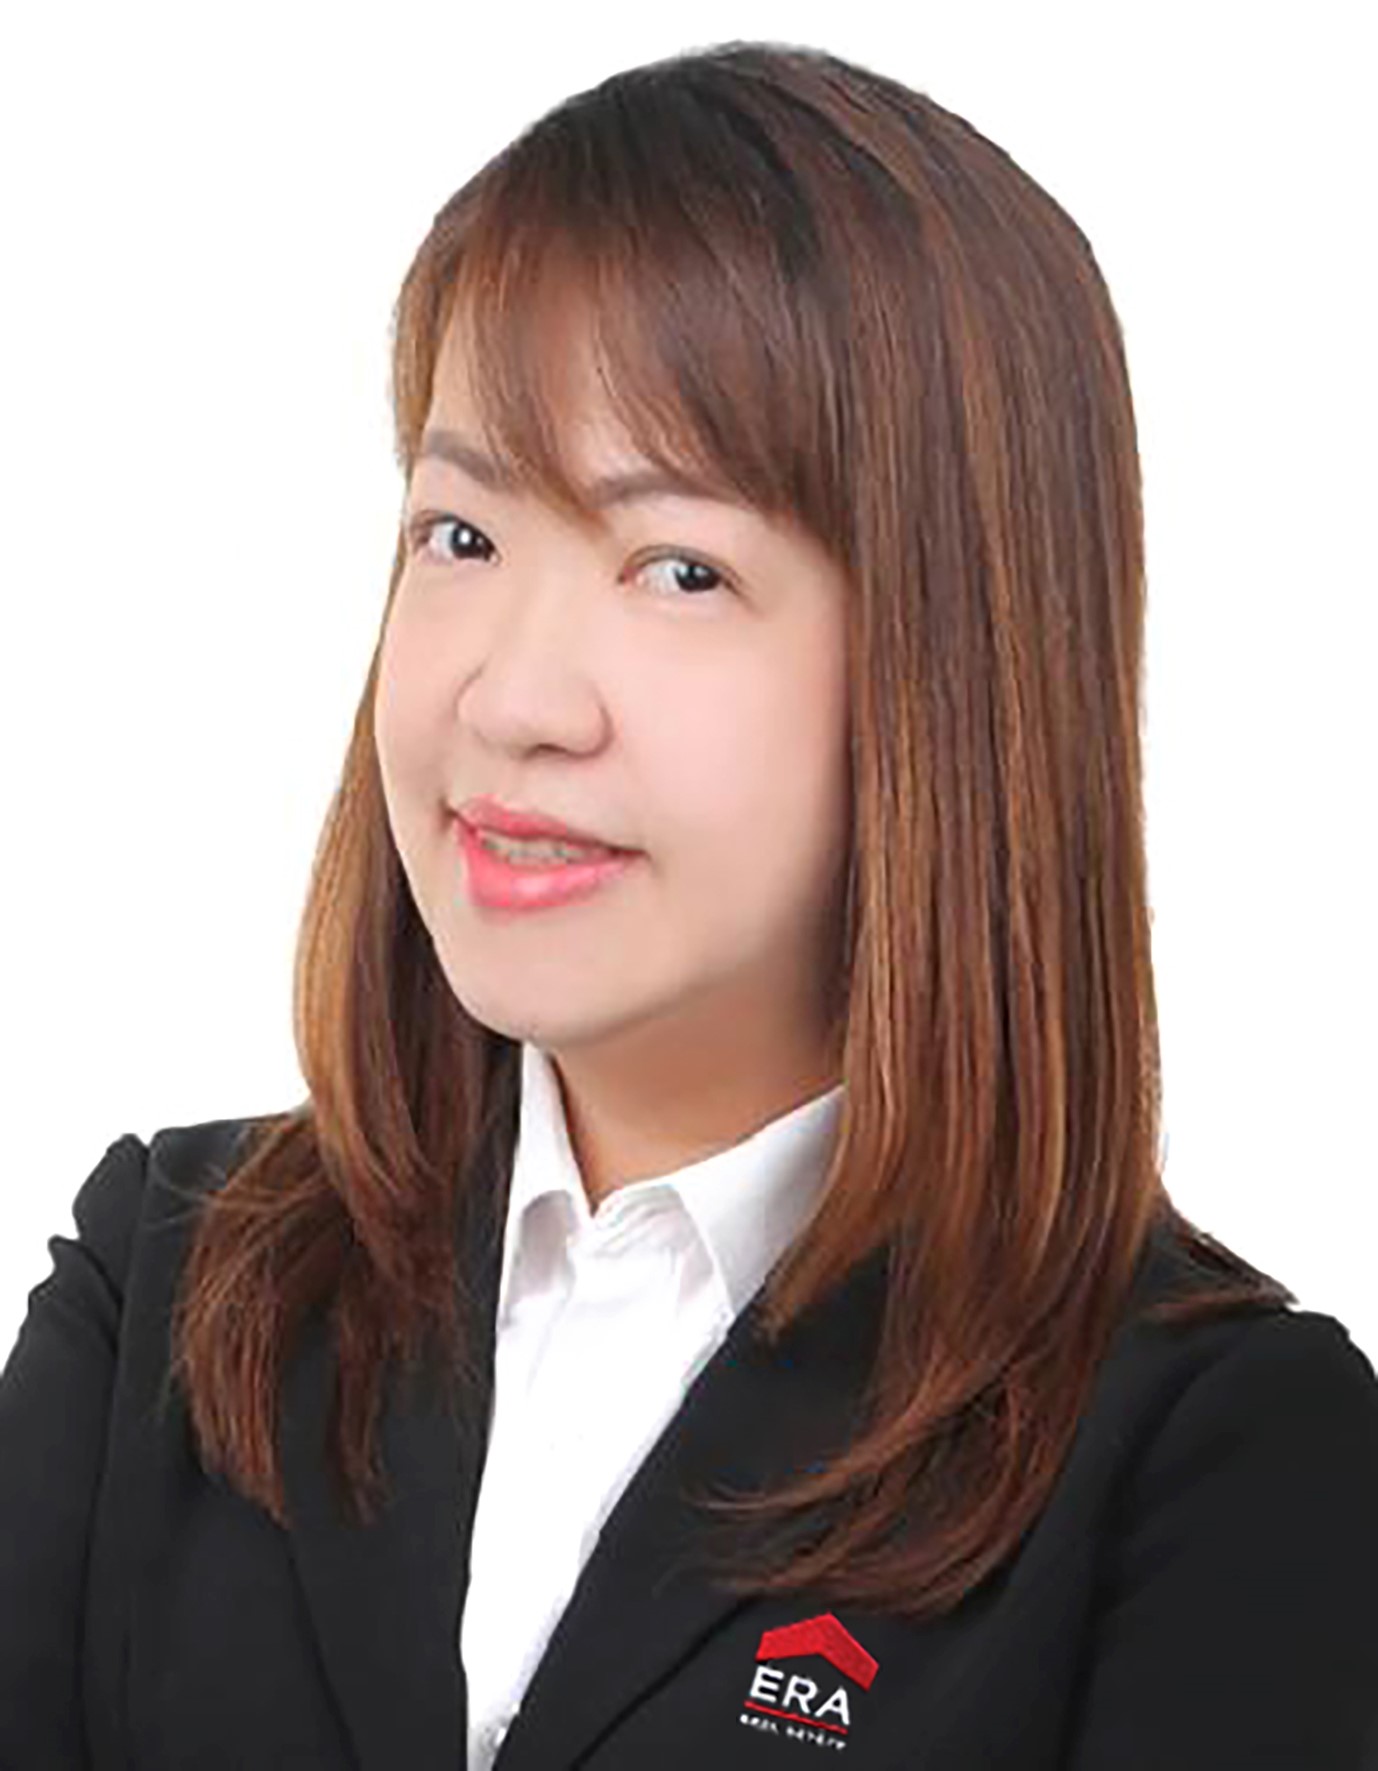 Sherly Tan Property Agent ERA's Banners Division